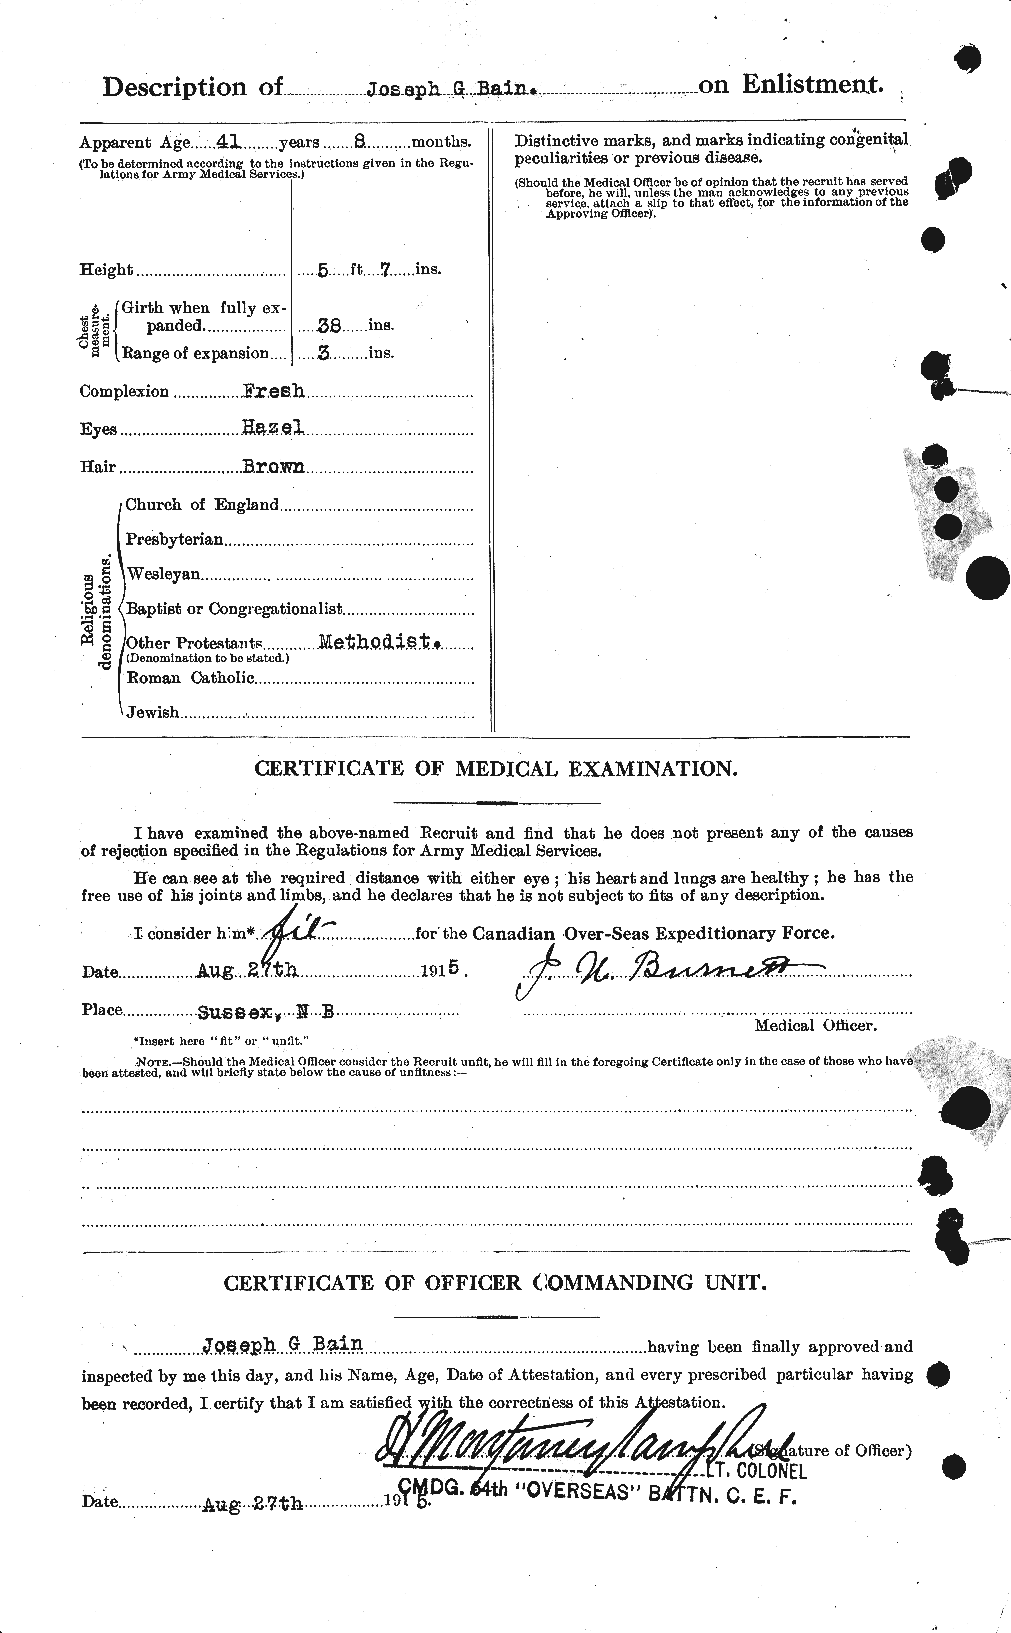 Personnel Records of the First World War - CEF 226077b